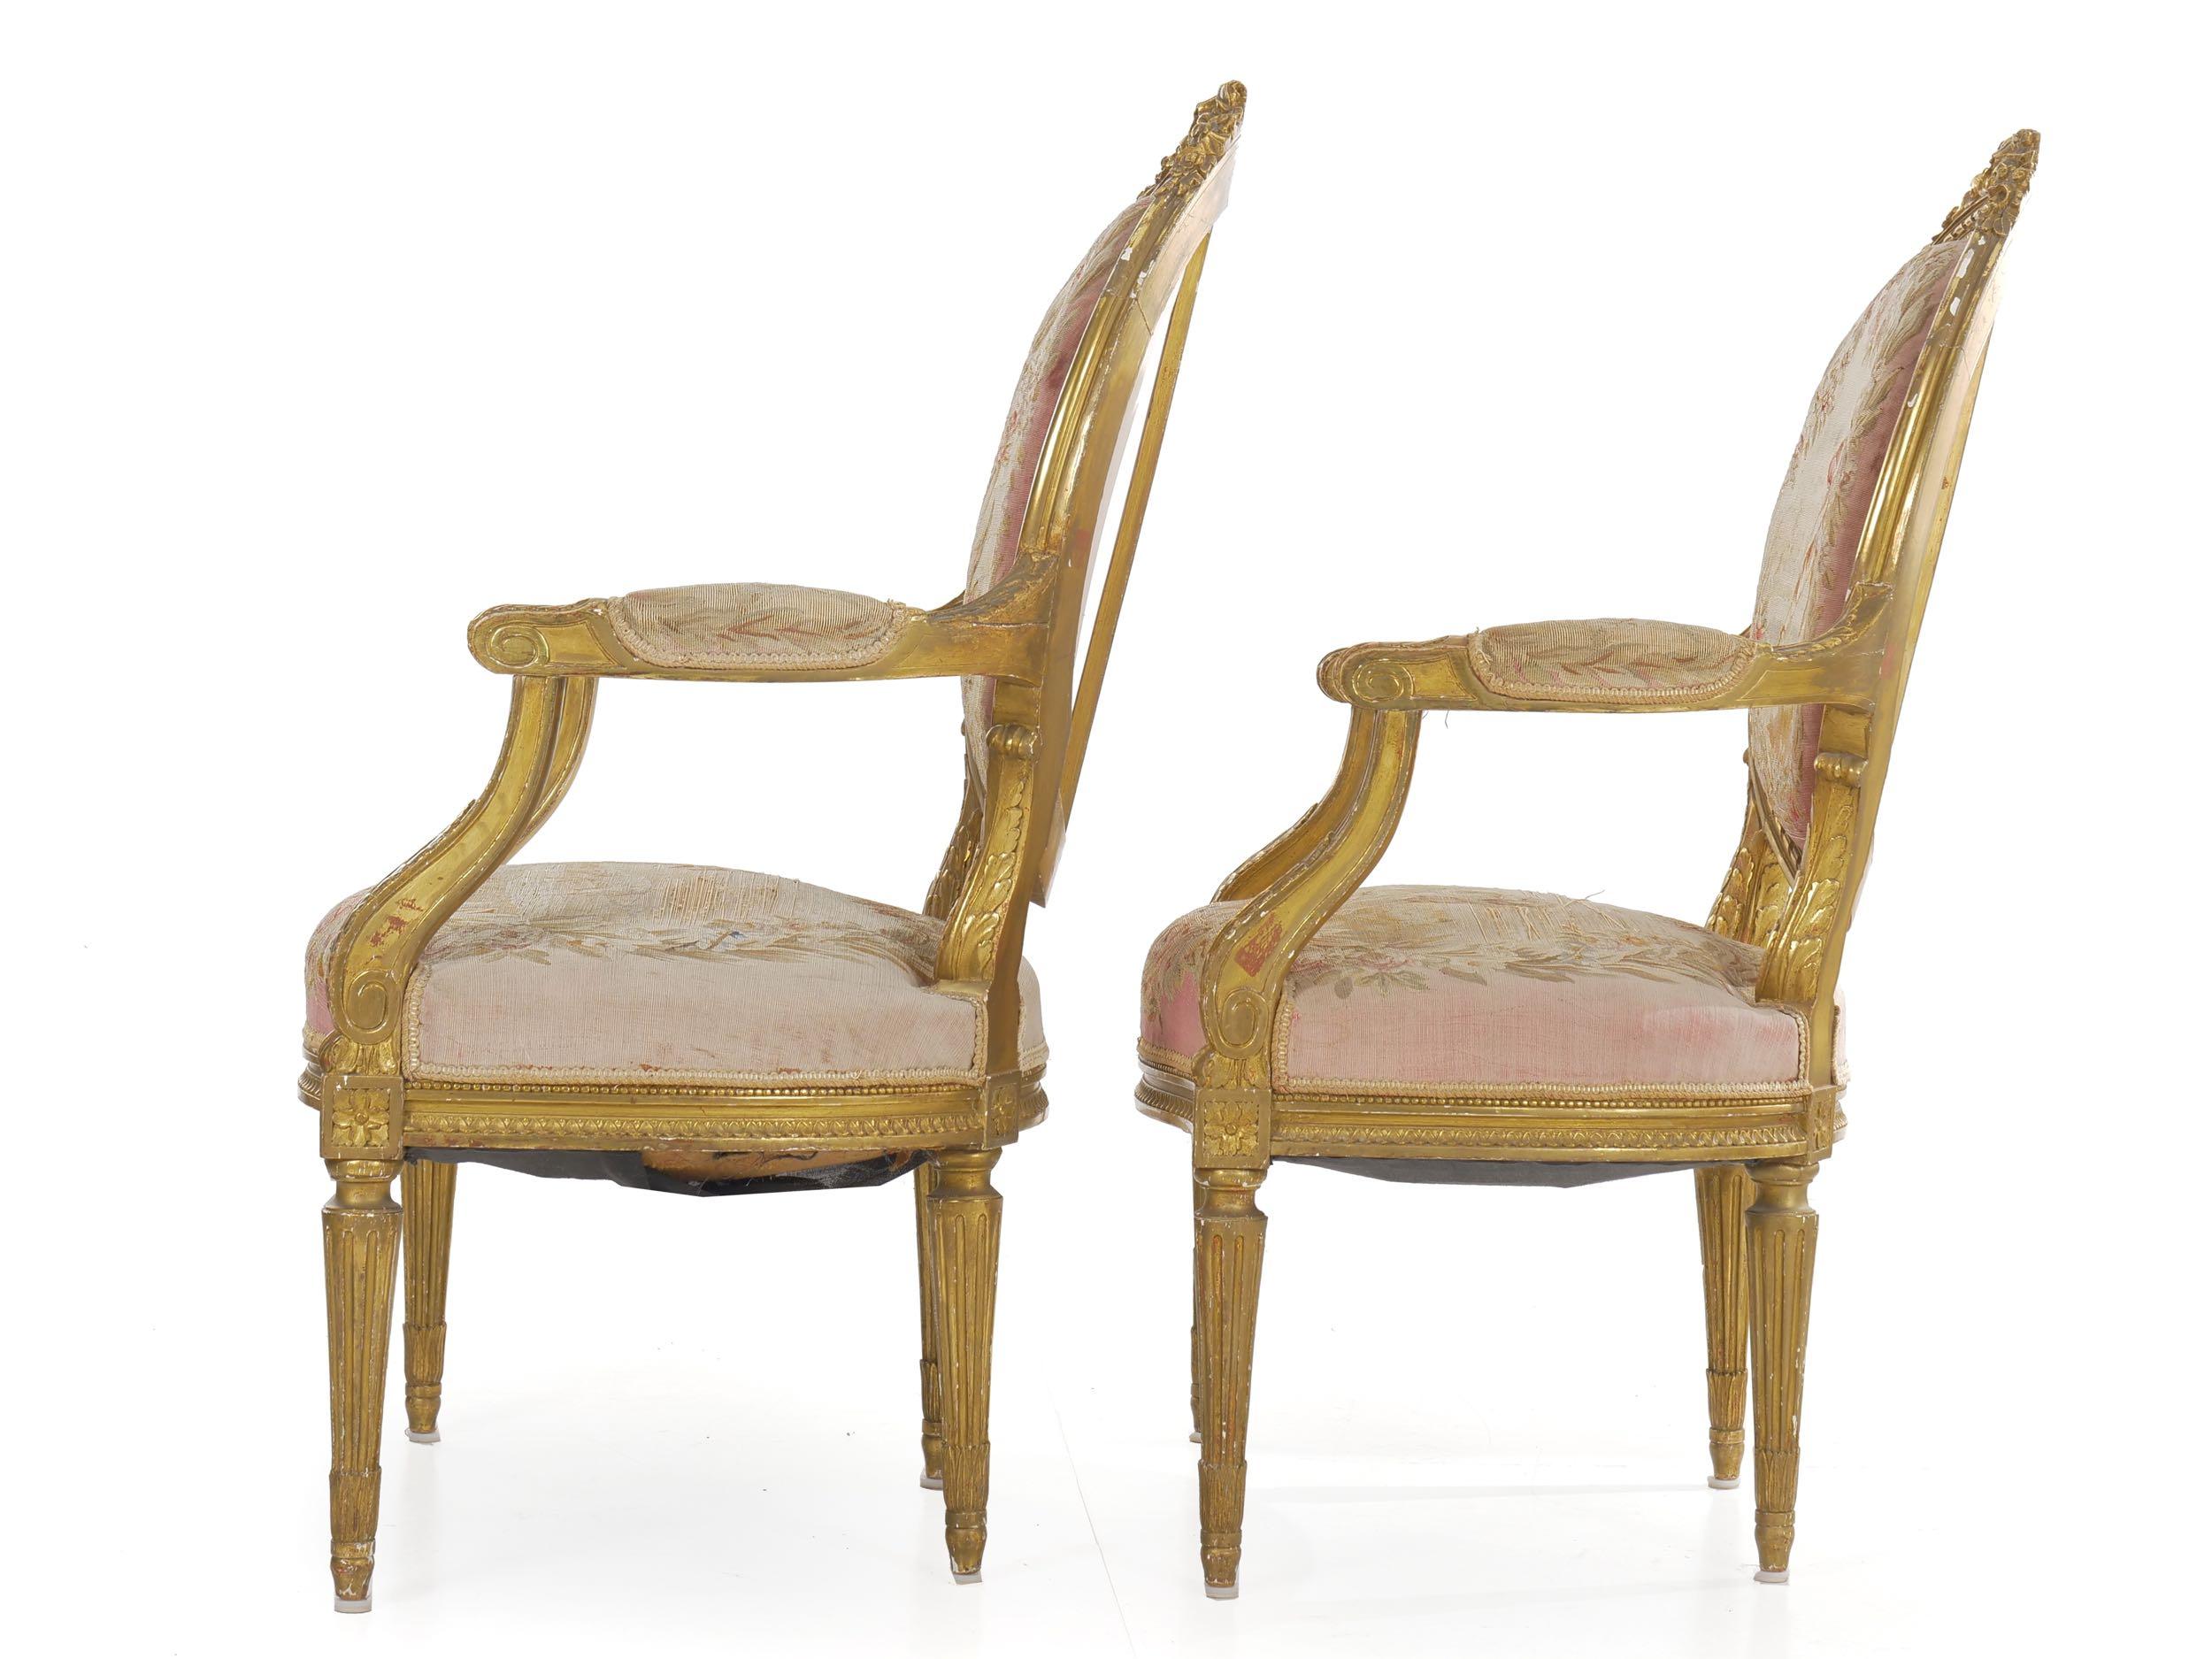 A very nice early 20th century pair of giltwood fauteuils designed in the iconic Louis XVI taste, this beautiful pair of chairs exhibit crisp carved motifs and an attractively worn tapestry upholstery. The rich gilded and painted surfaces are